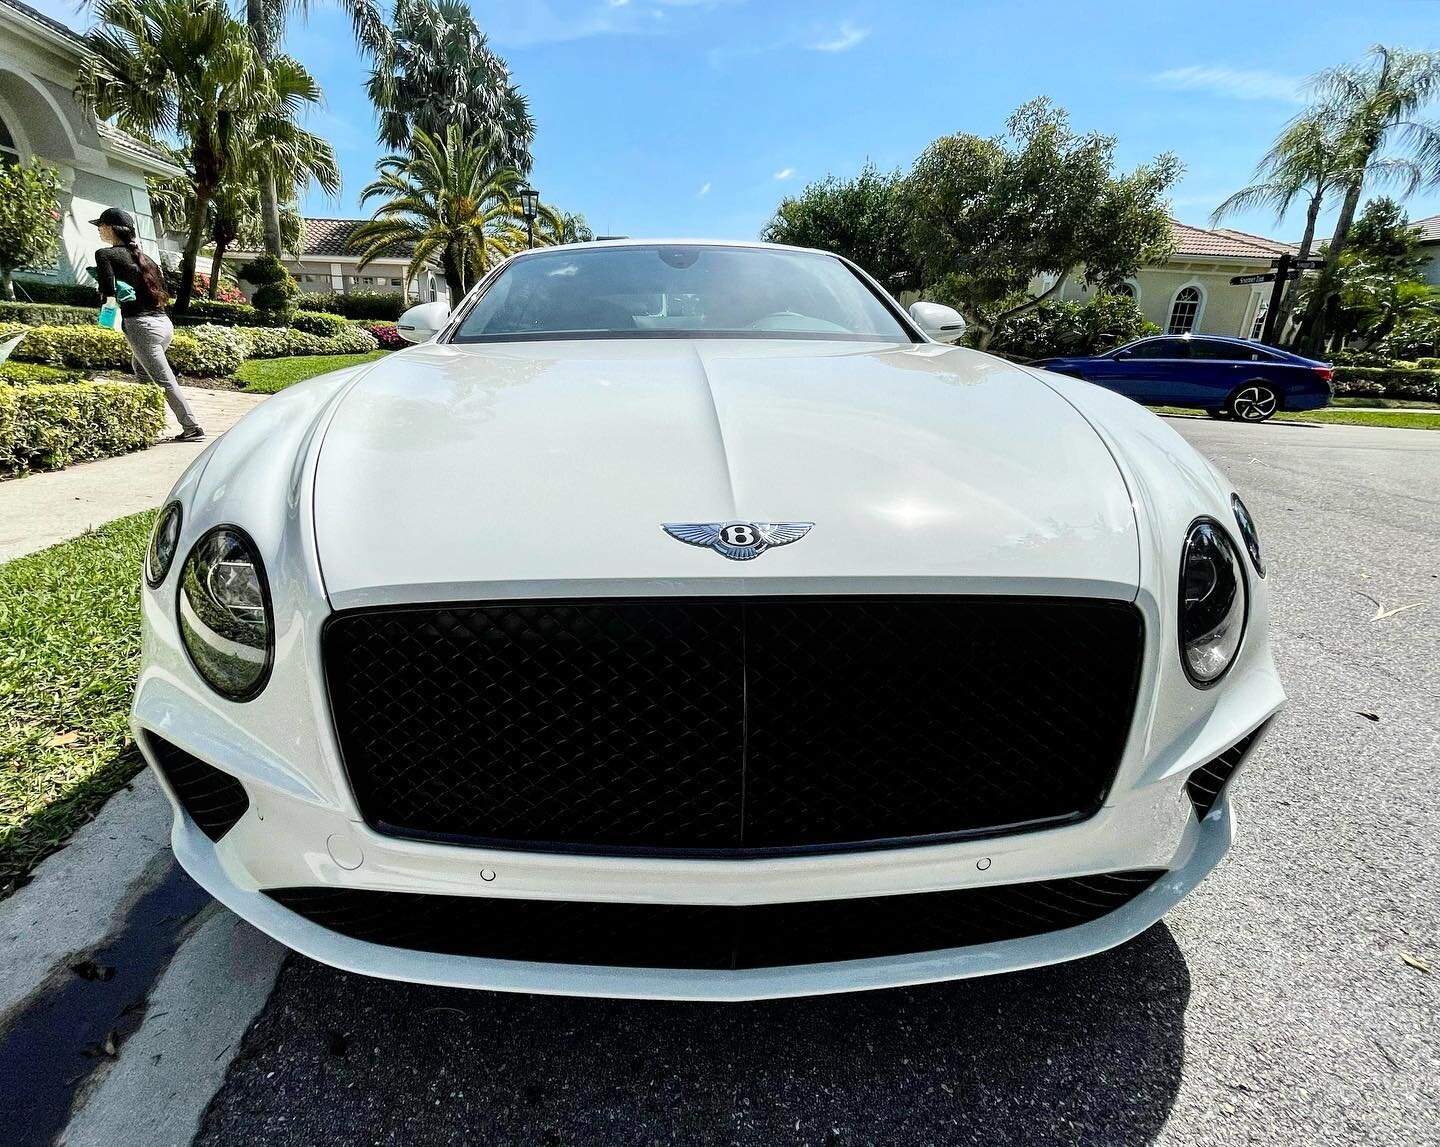 Bentley continental Gt 
The GT stands for grand touring, giving an Elegant bodywork, ultra-luxe interior and a muscle car - performance.
#solosteam